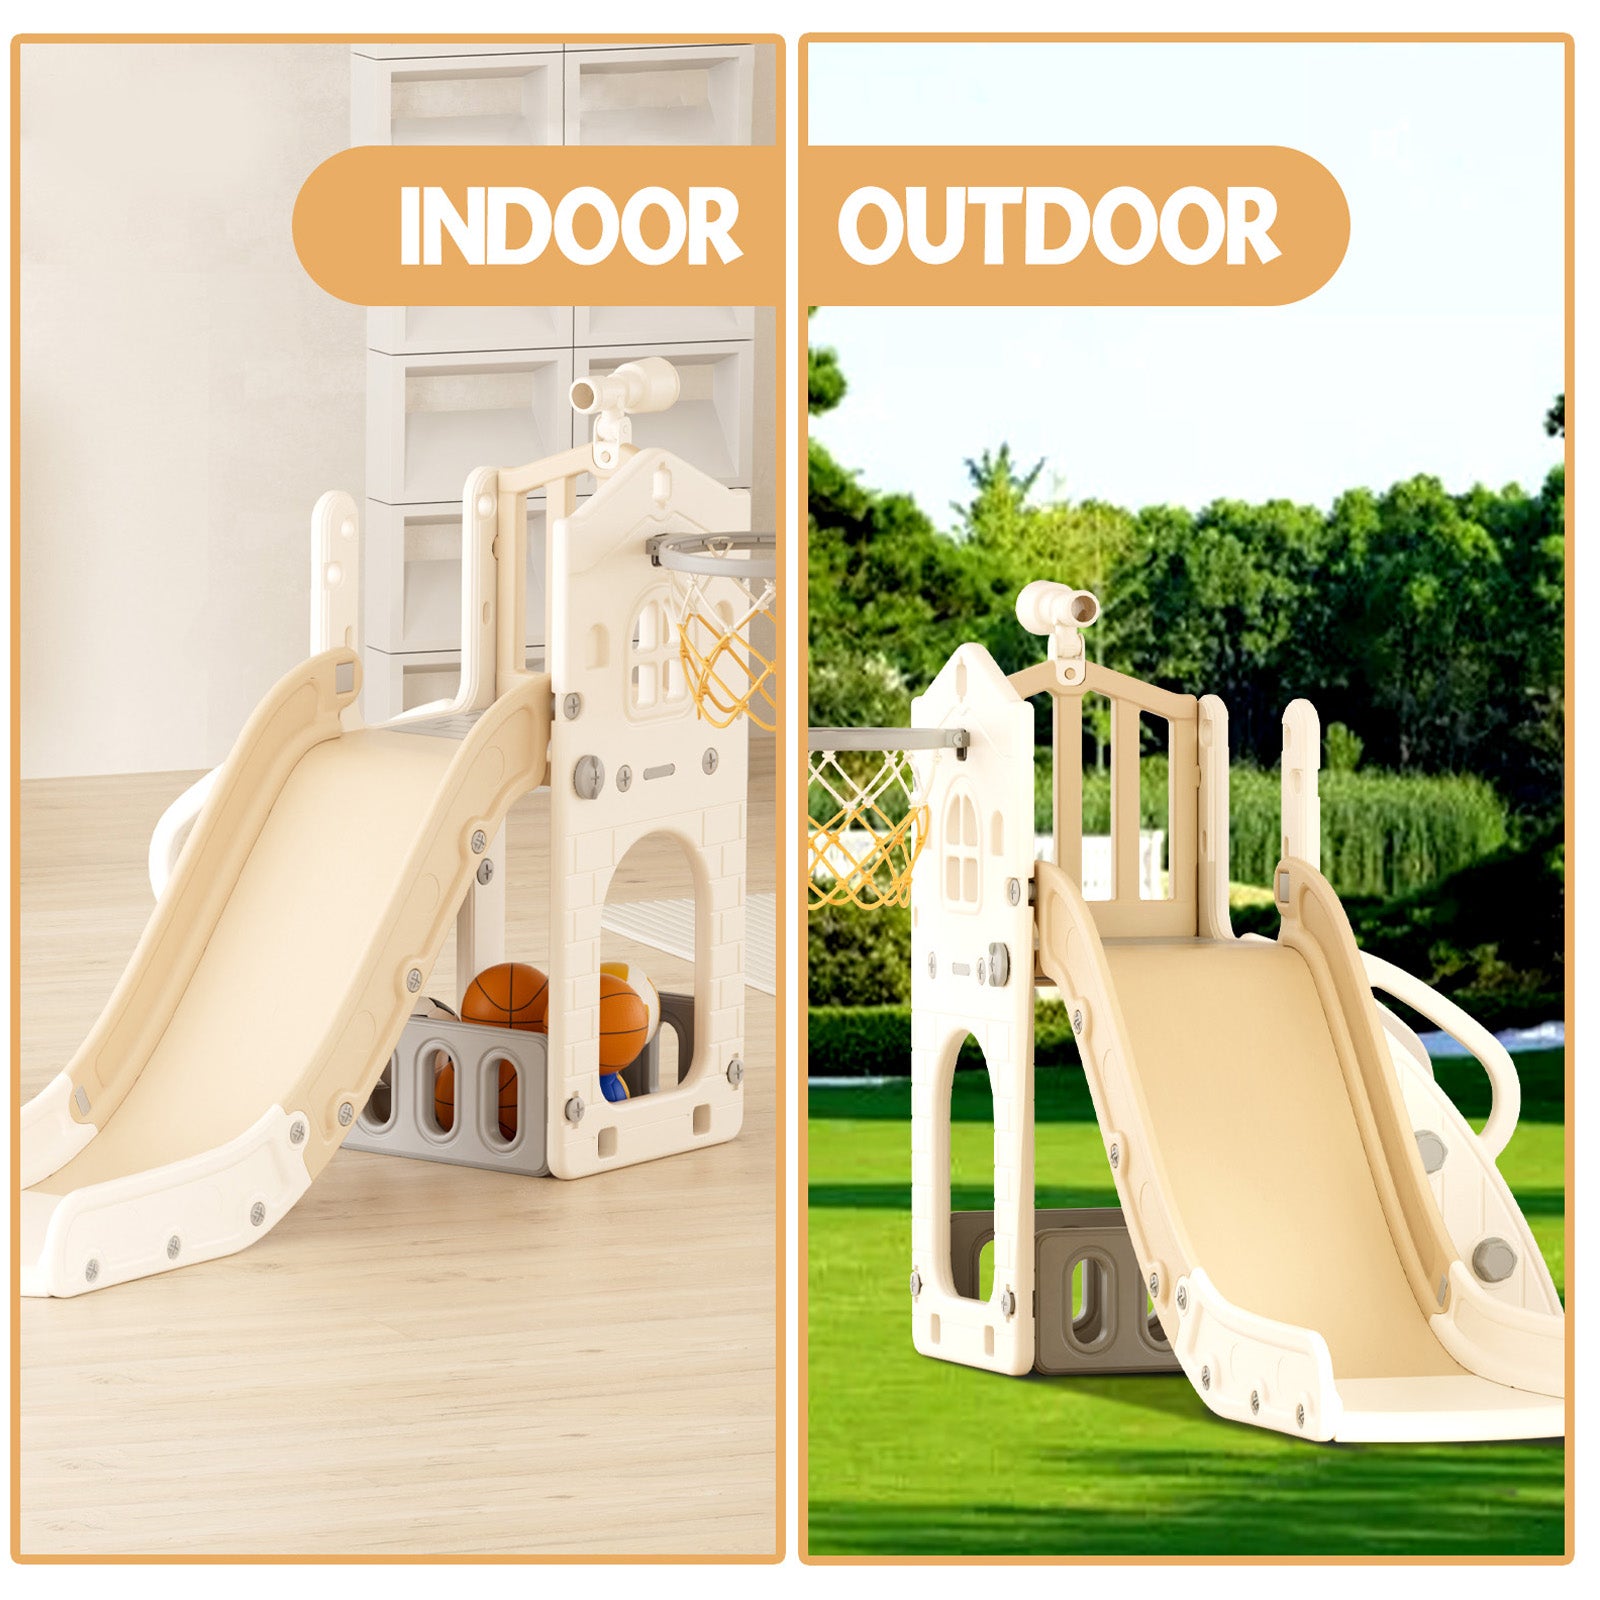 XJD 5 in 1 Toddler Slide Set  Climber Slide for Age 1-3, Outdoor Indoor Playset with Basketball Hoop, Telescope, and Storage Space, Beige/Coffee